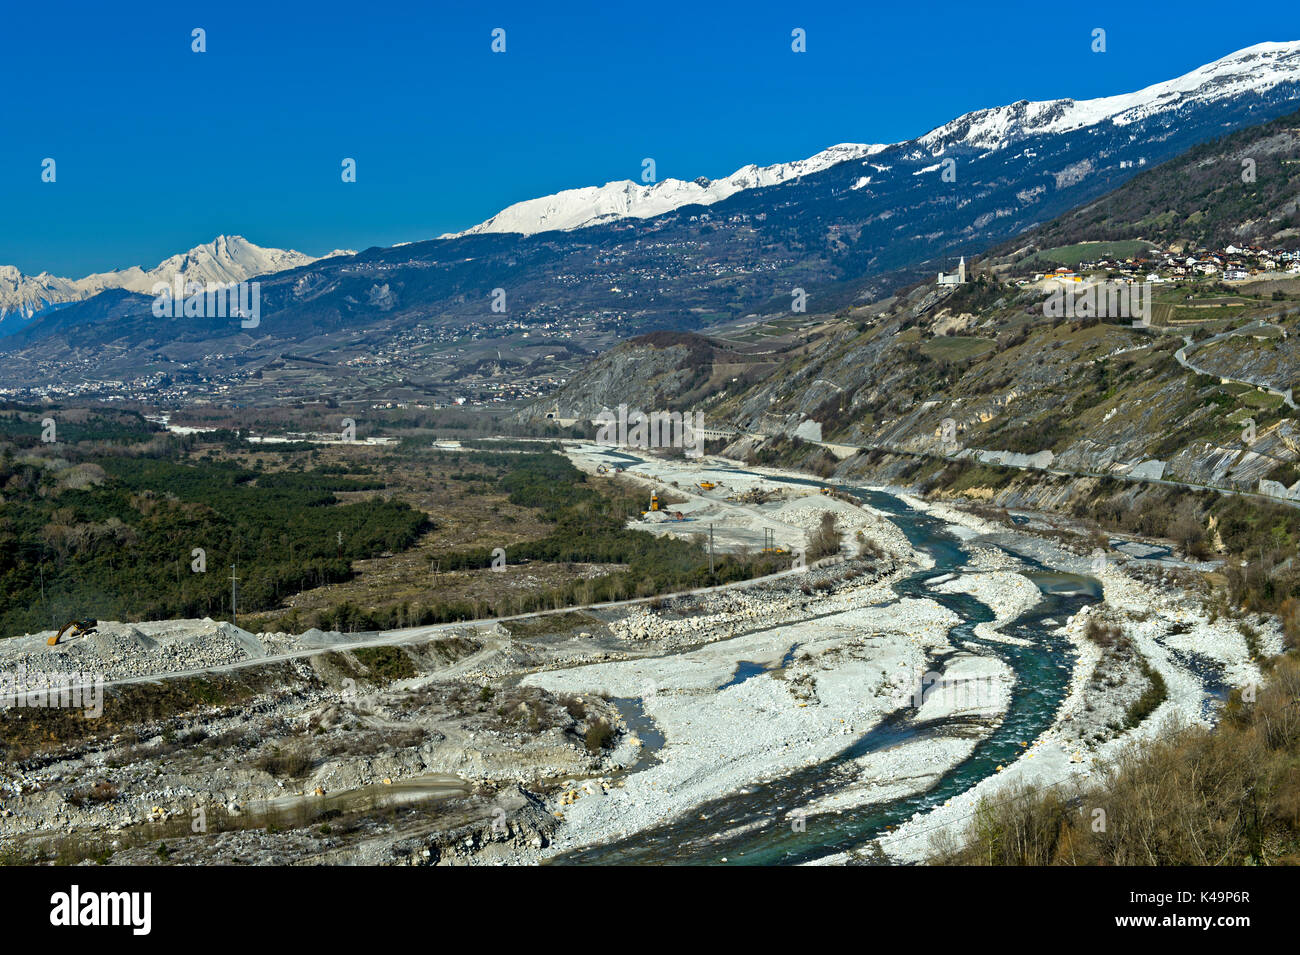 Parched Valley Of The Rhone River Near Leuk Before The Thawing Period In The Alps, Valais, Switzerland Stock Photo